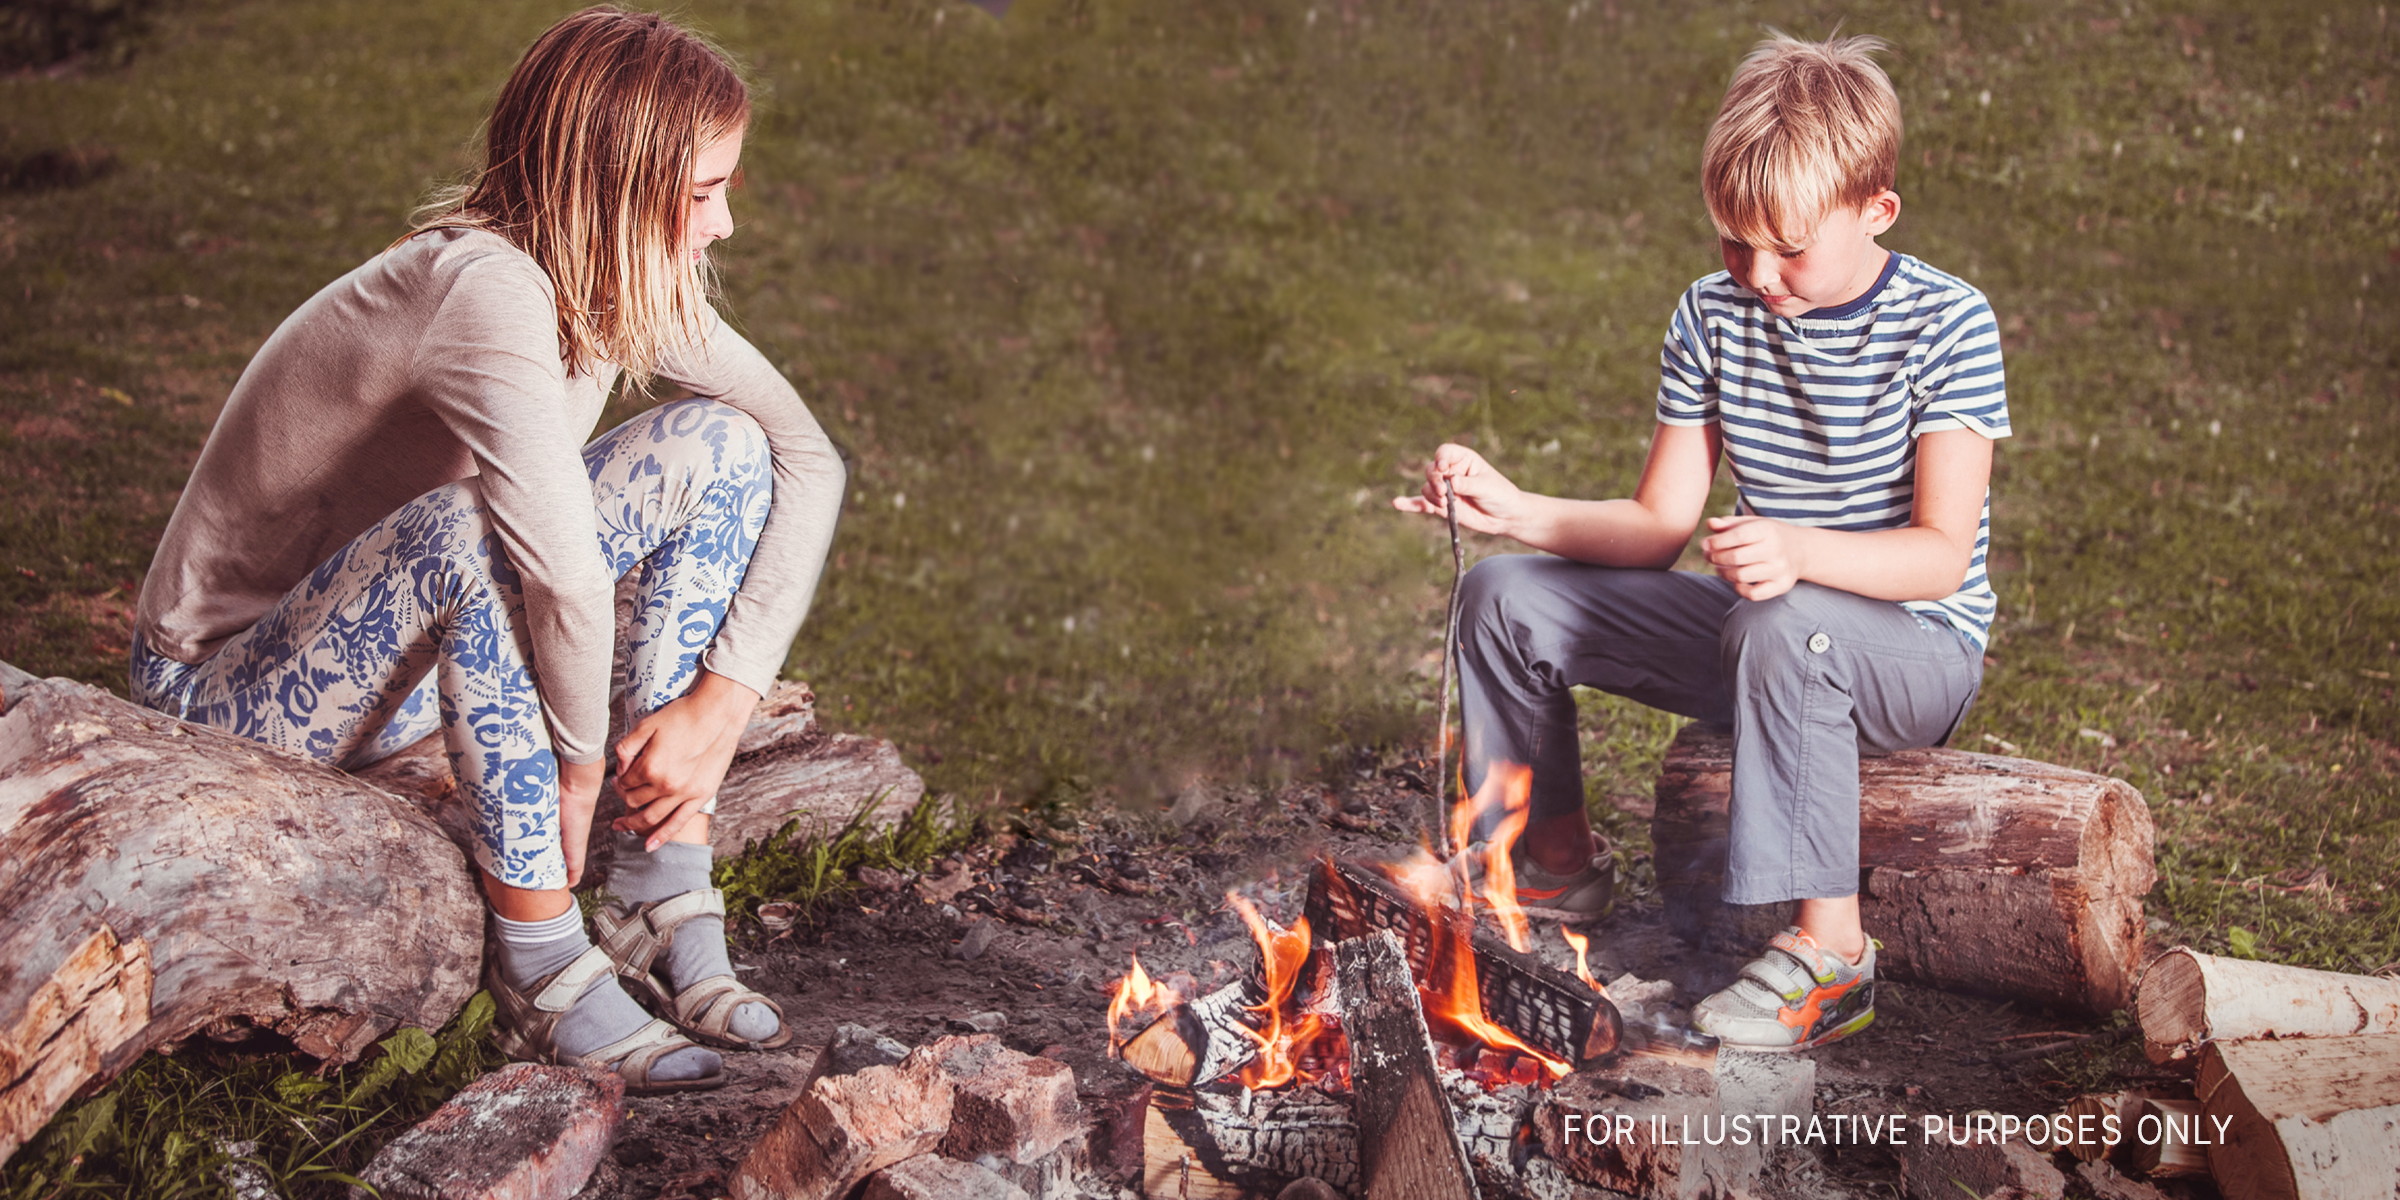 A boy and girl sit across from each other at a campfire | Source: Shutterstock